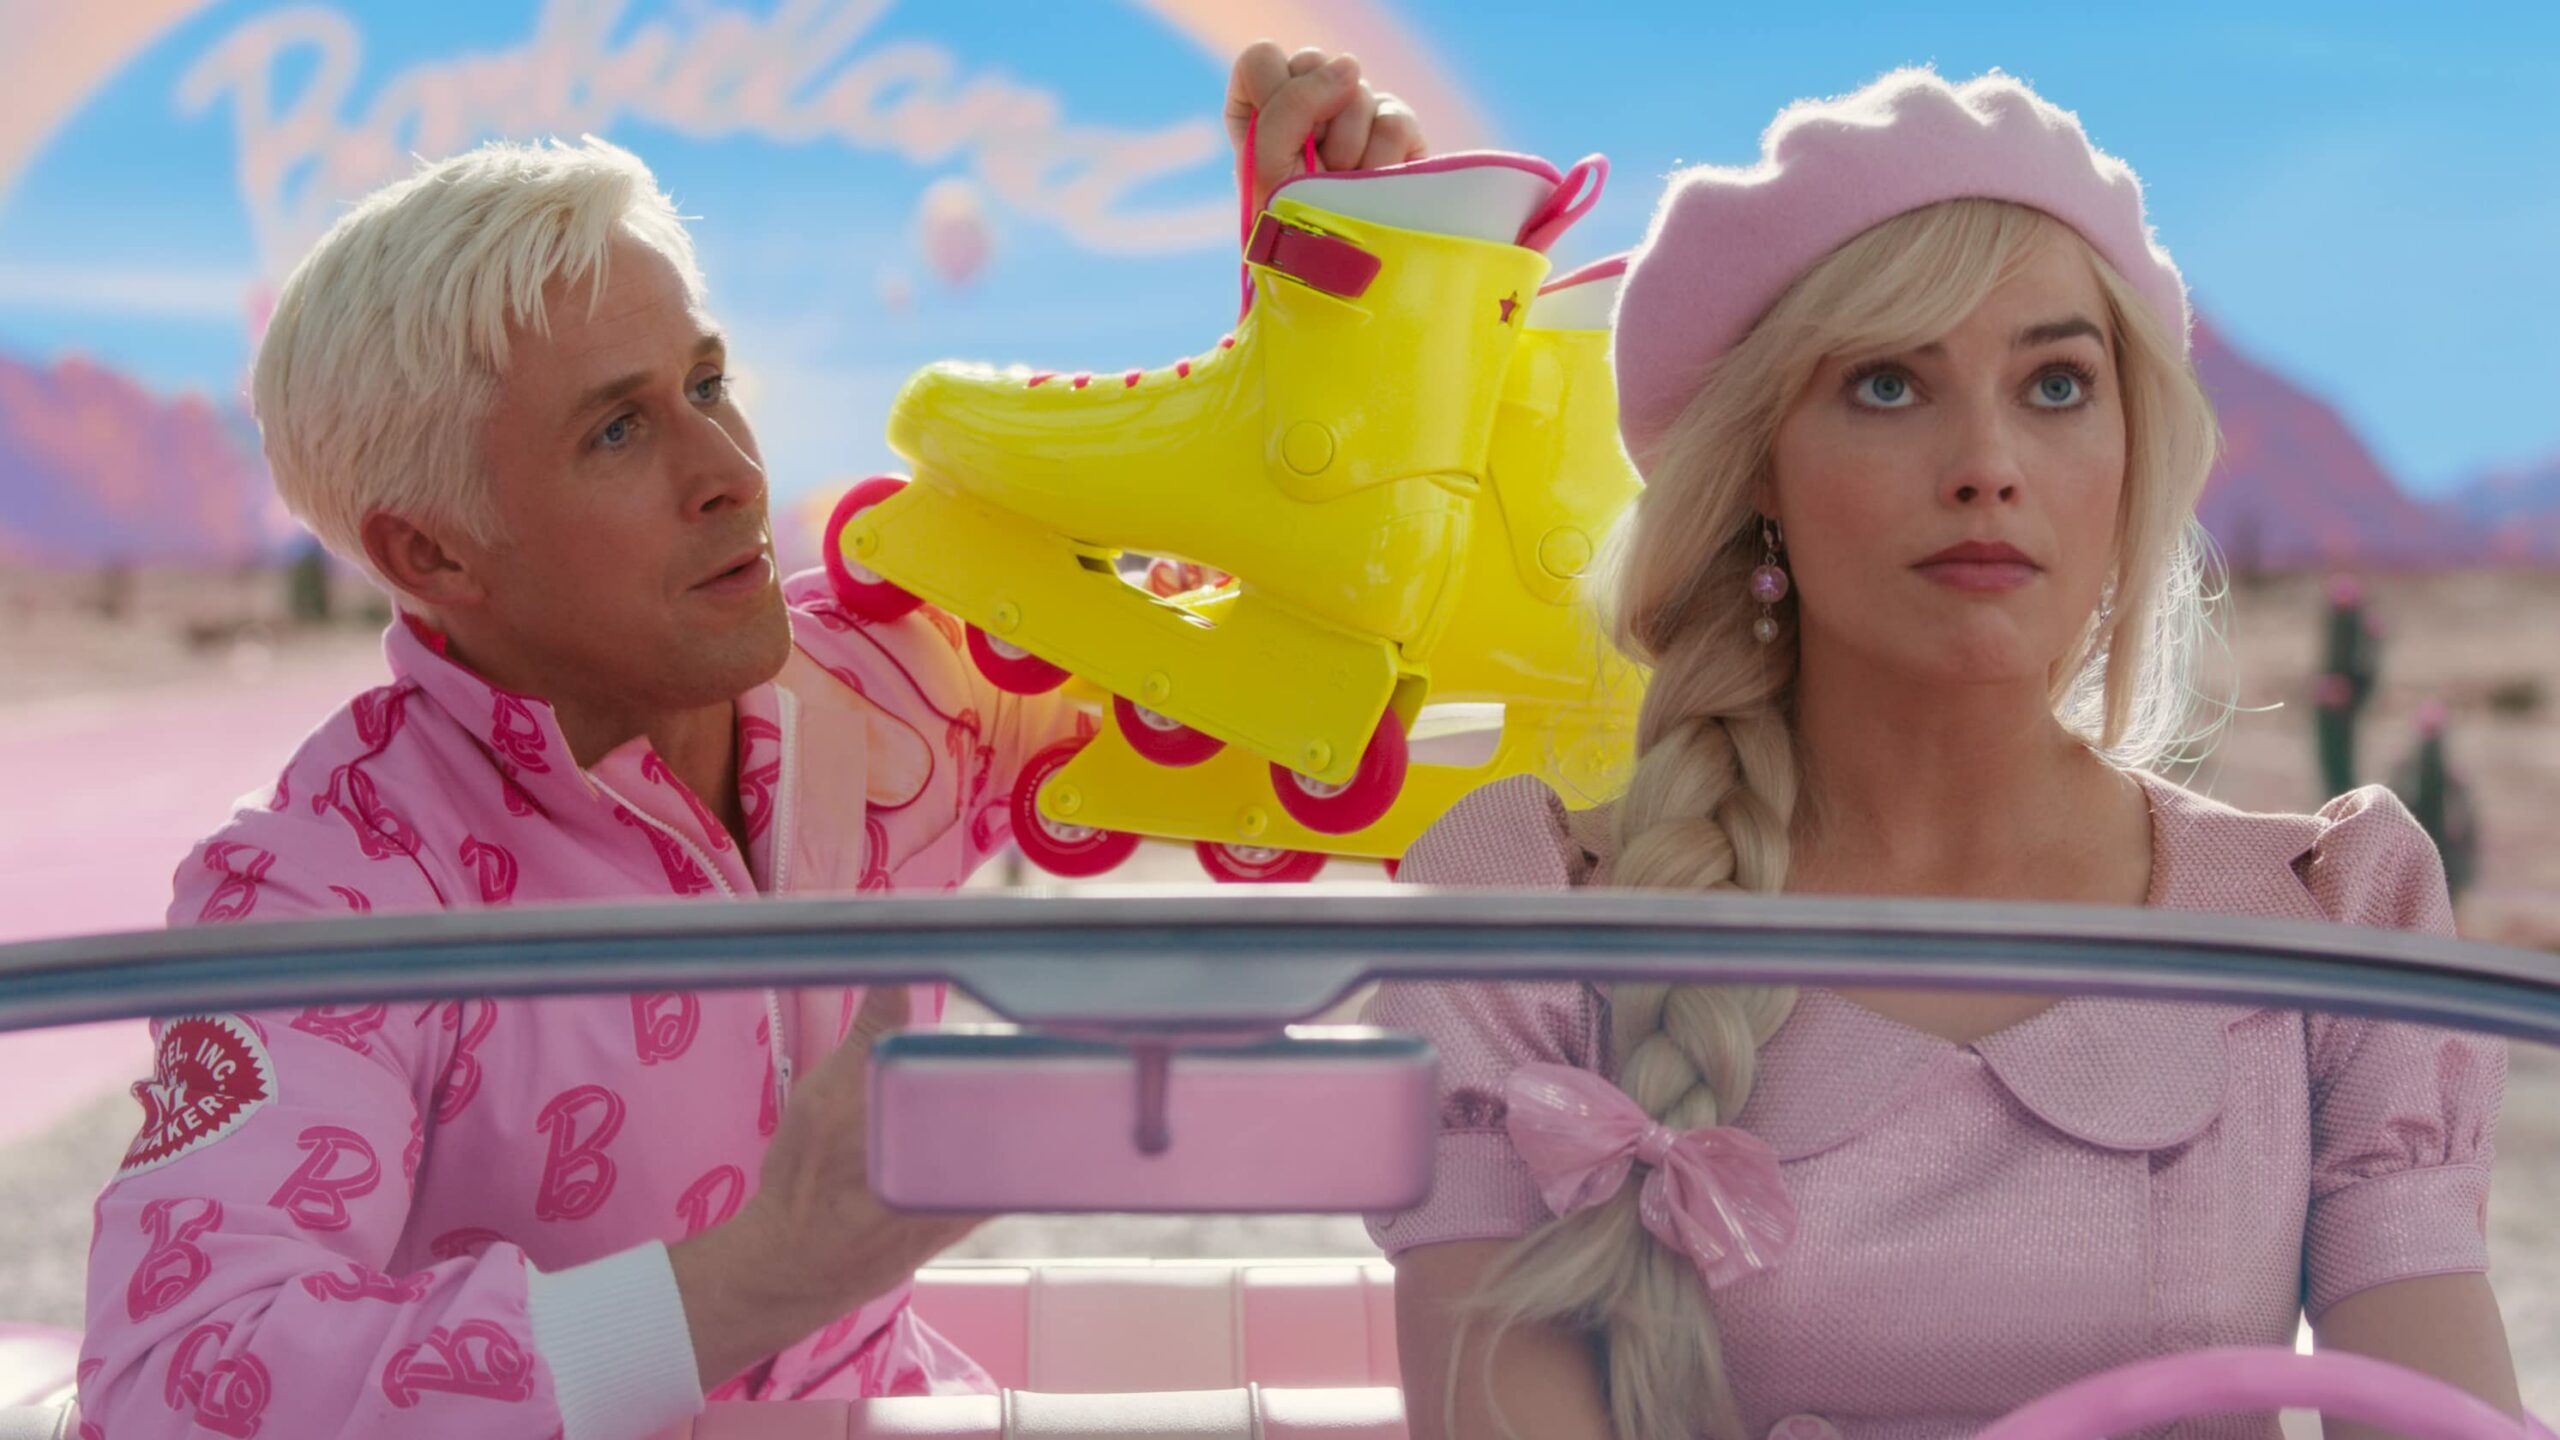 ‘Barbie’ Has Been Streamed on Max by More Than One Million Households